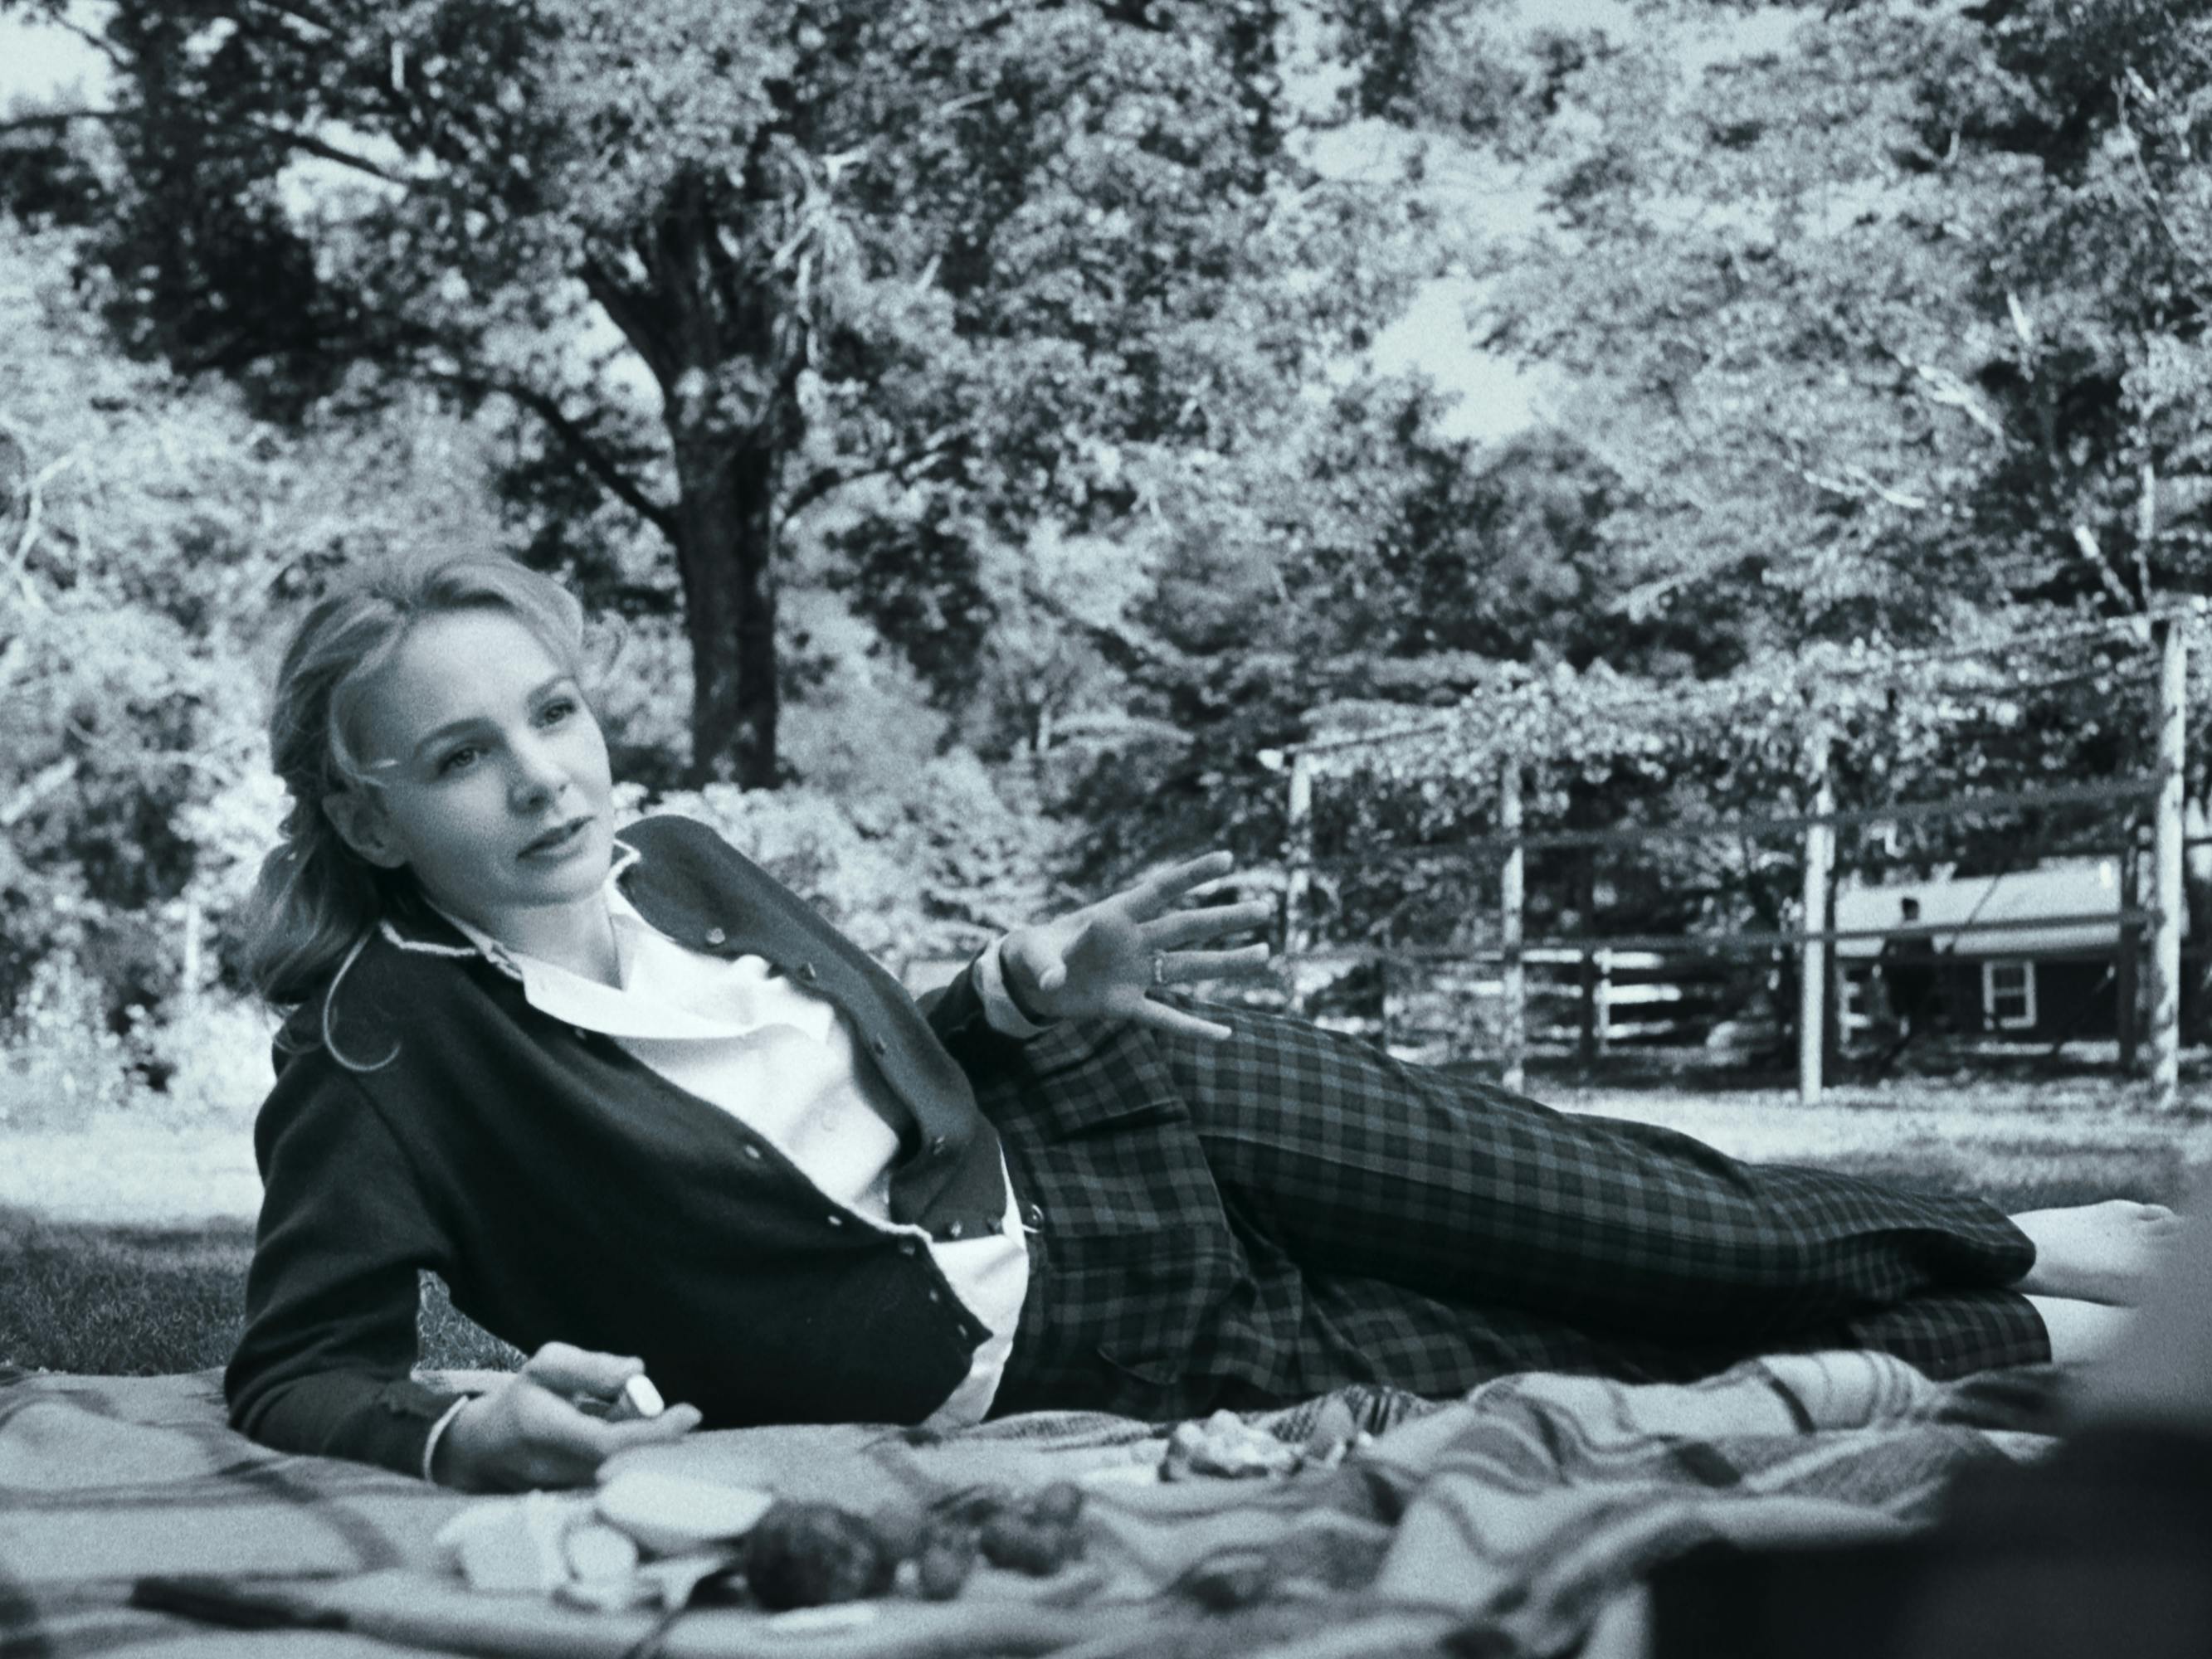 Felicia Montealegre Cohn Bernstein (Carey Mulligan) wears a fabulous outfit: plaid pants, a white blouse, and a cardigan.